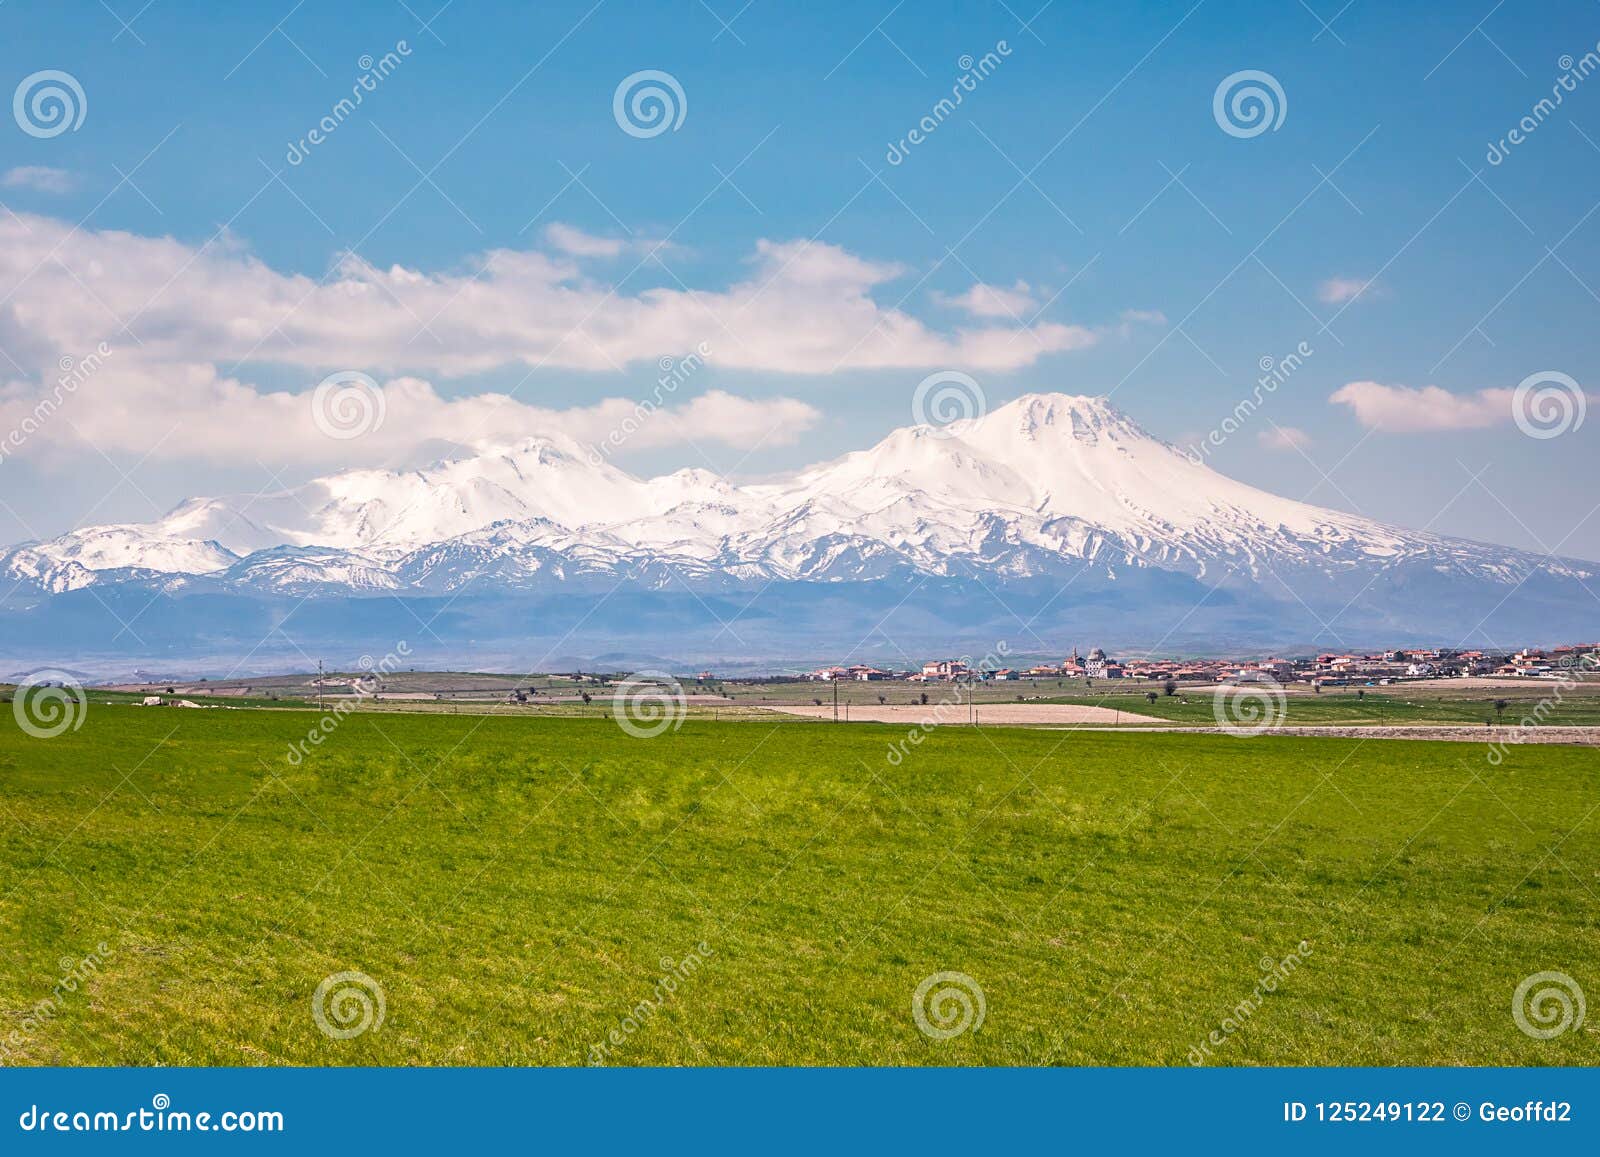 Field Of Grass And Snow Capped Mountains And White Clouds Against A